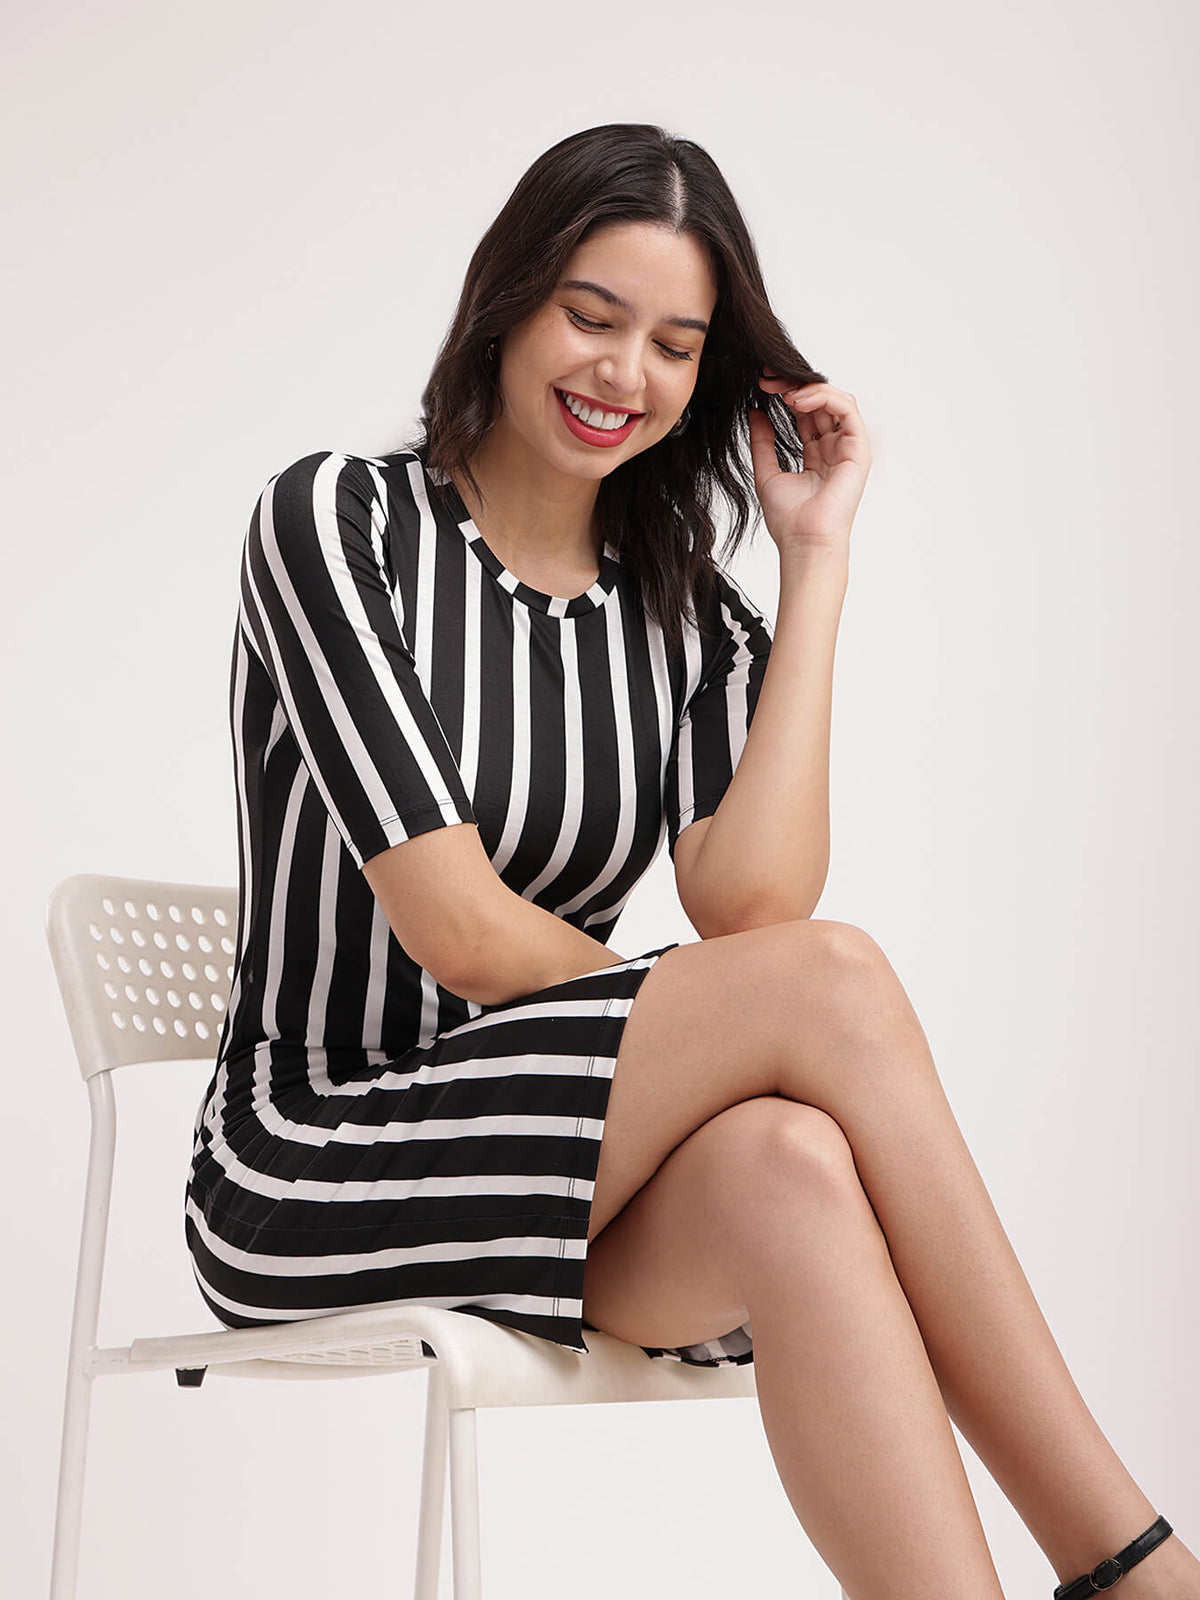 Striped Knitted Shift Dress - White And Black